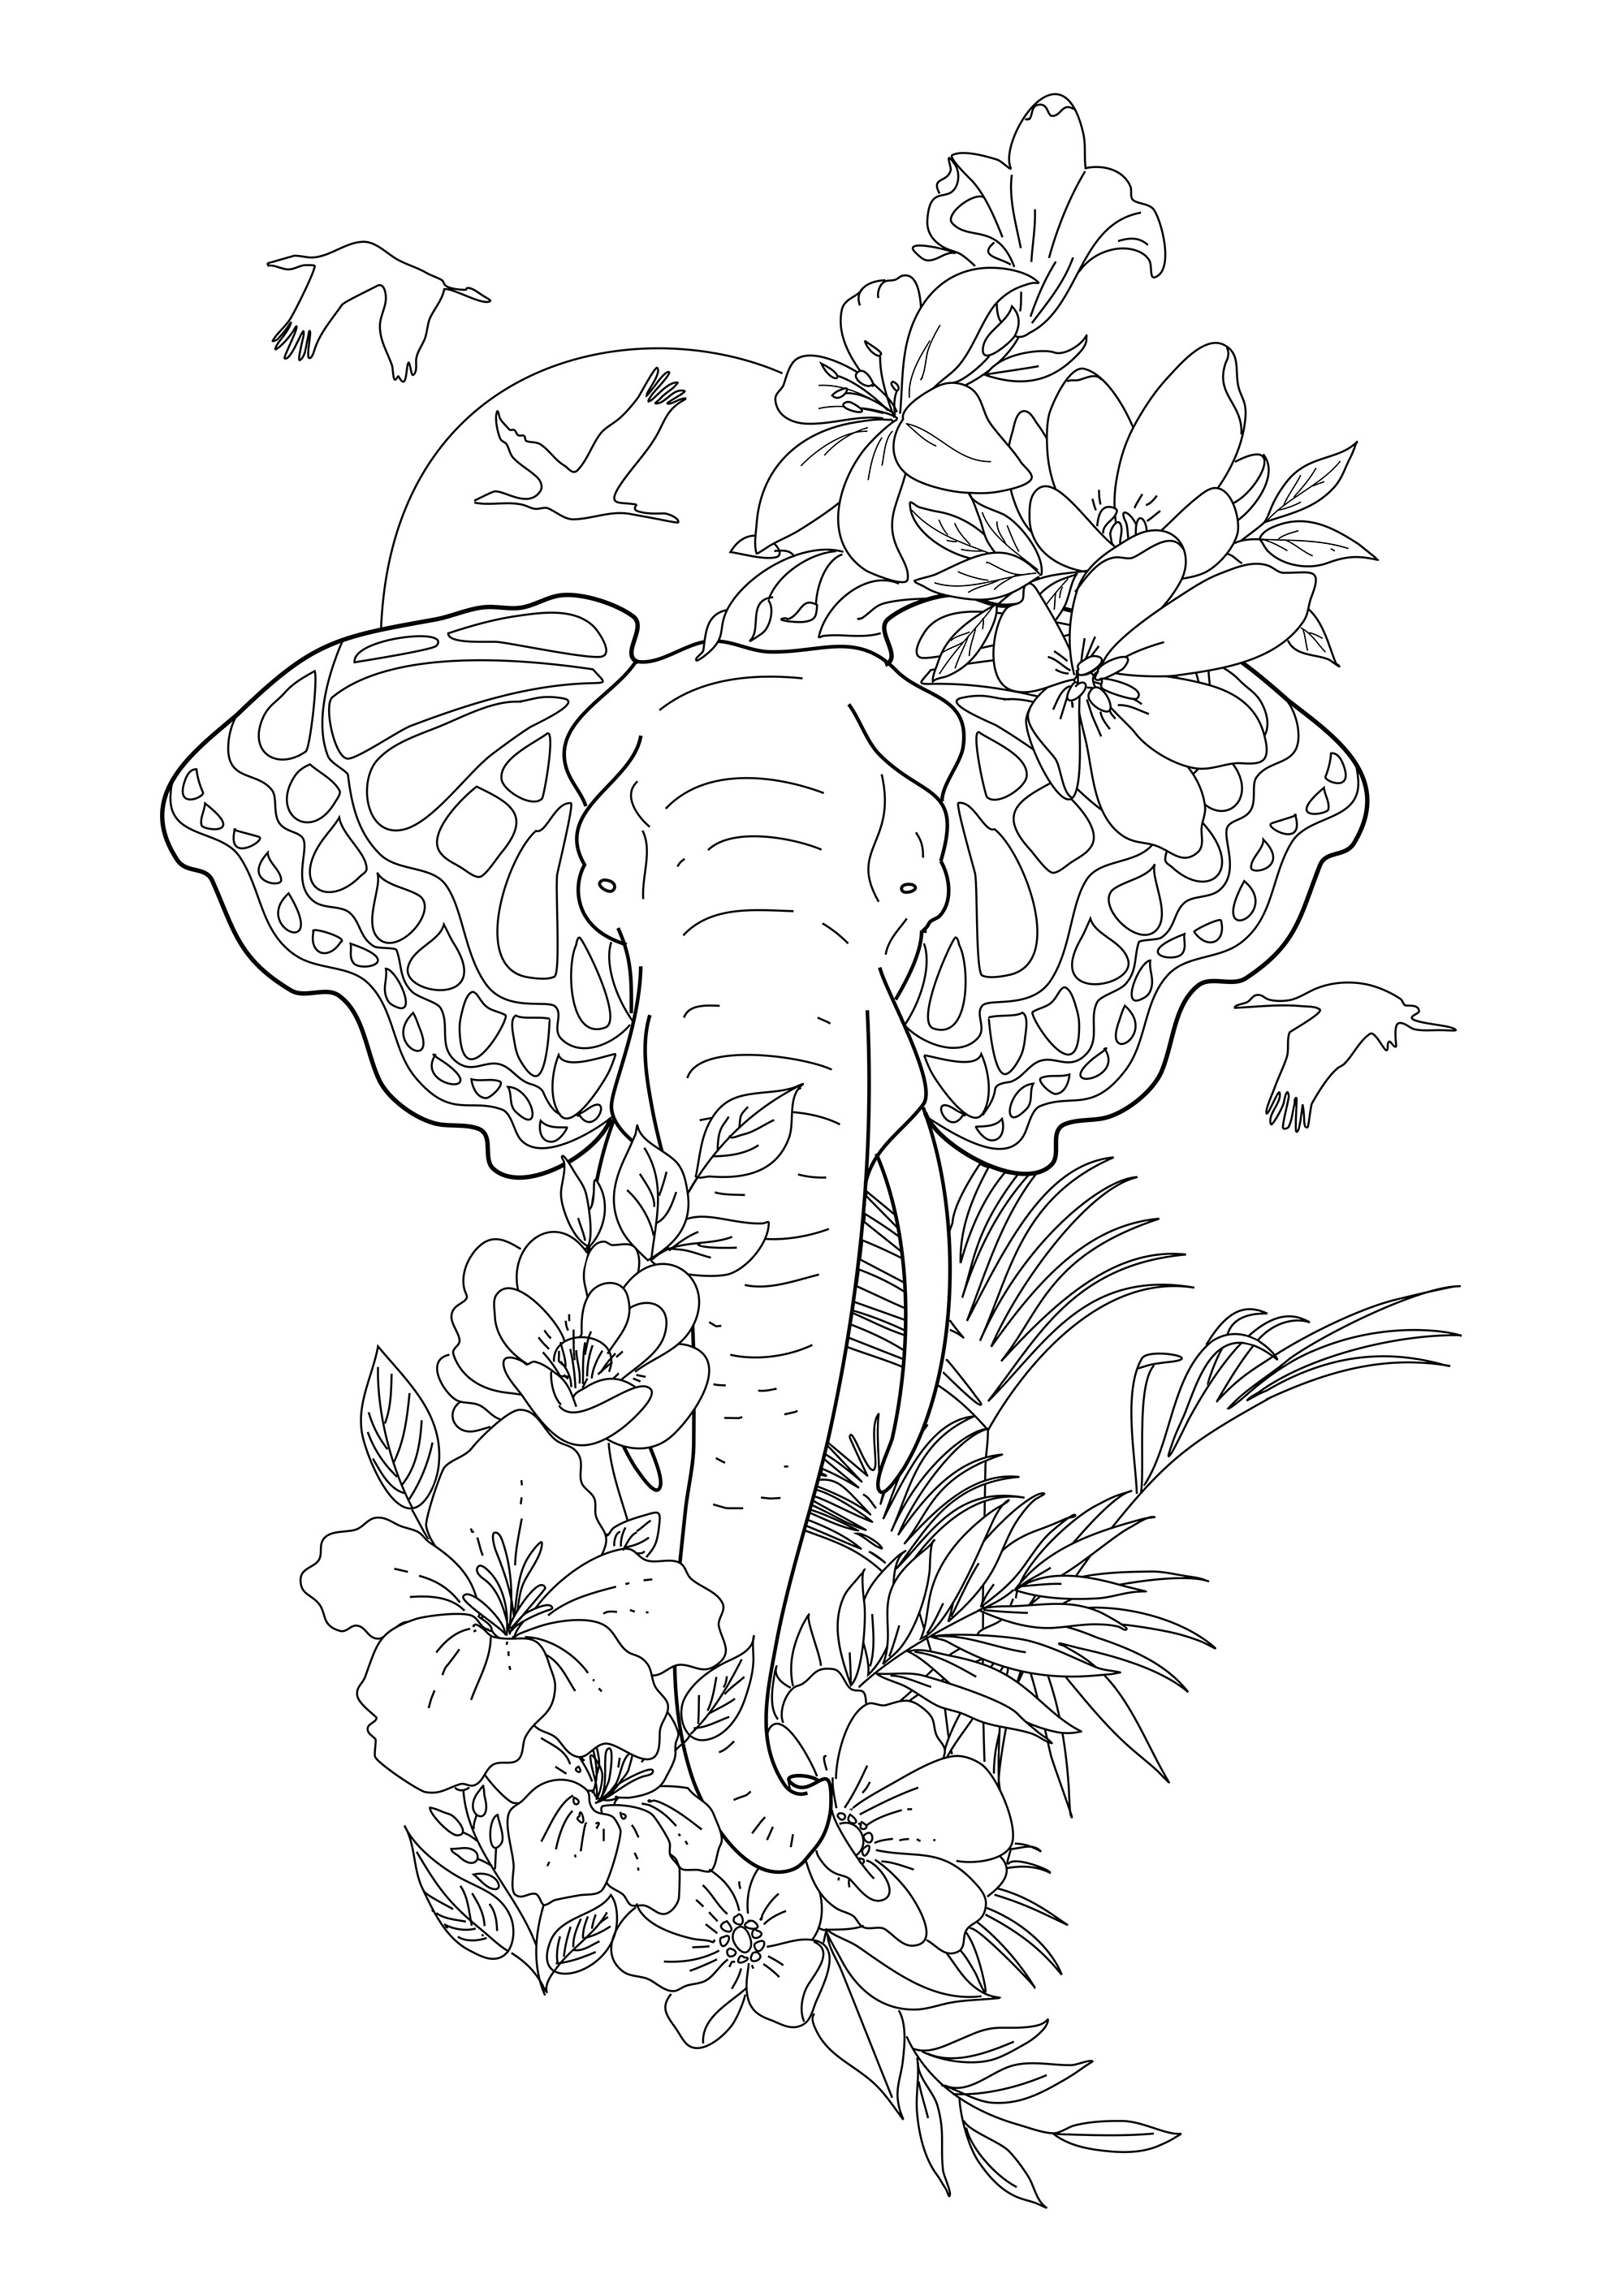 Elephant and Butterfly, with flowers and birds. This illustration represents duality and balance in nature.  The elephant is a symbol of stability, heaviness, and reality, while the butterfly (whose wings shape the elephant's ears) is a symbol of transformation, lightness, and imagination.  From the book “Realistic Tattoos Coloring Book” by Italian tattoo artist and author, Roberto “GiErre” Gemori  Product page: coloringbook.pictures/index.html  Author's website: Tattootribes.com